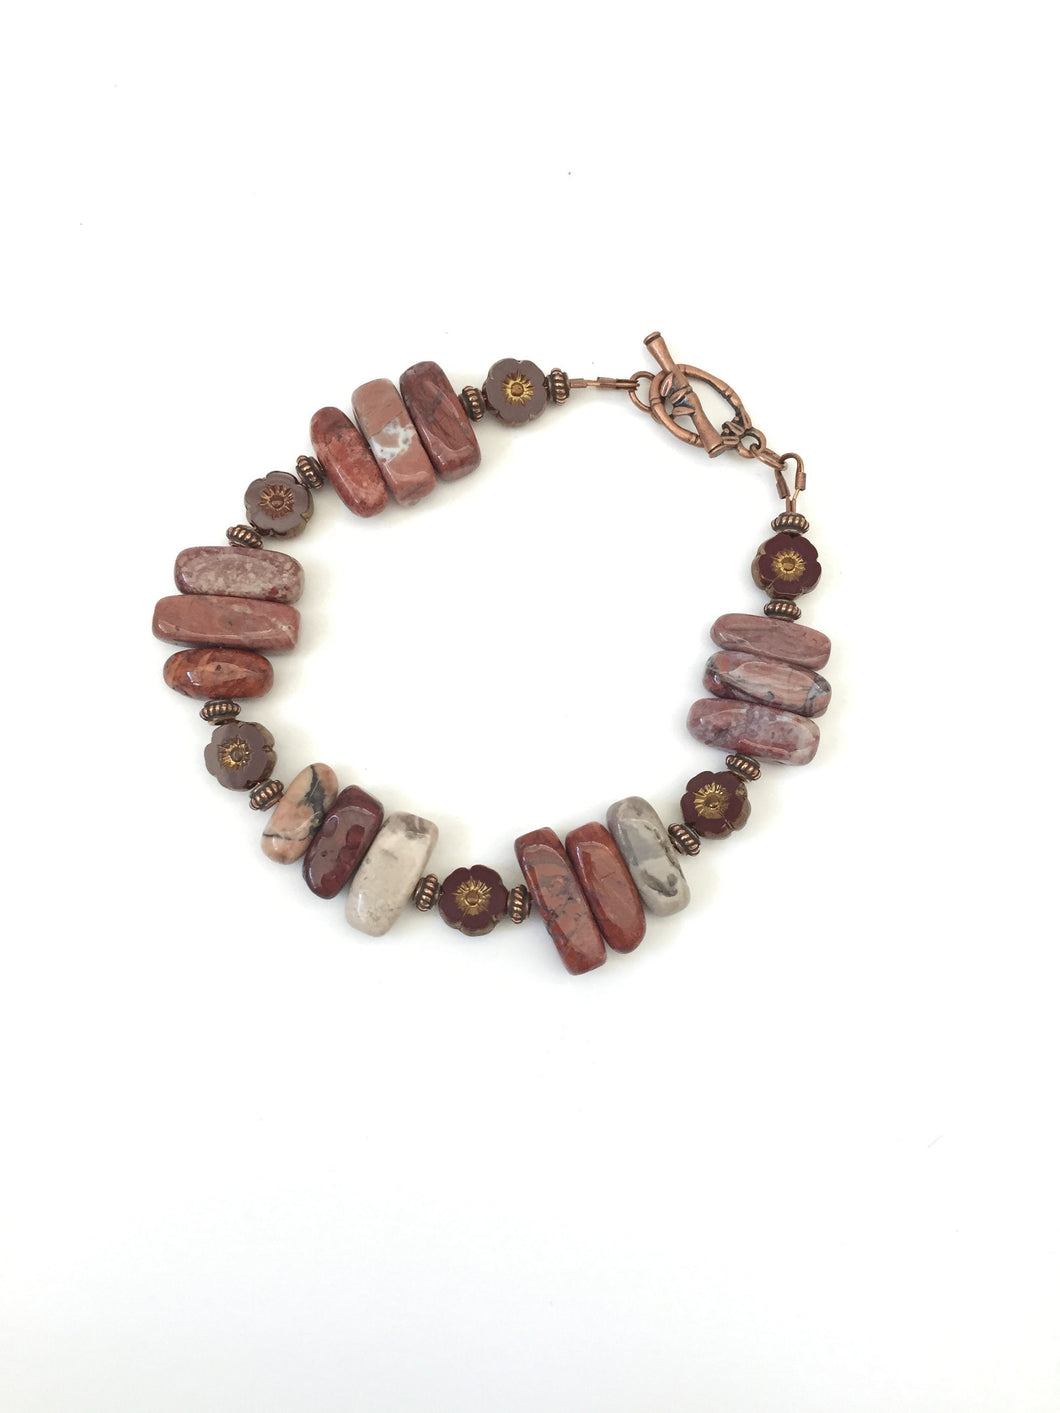 Red And Brown Jasper Gemstone Bracelet With Copper Toggle Clasp